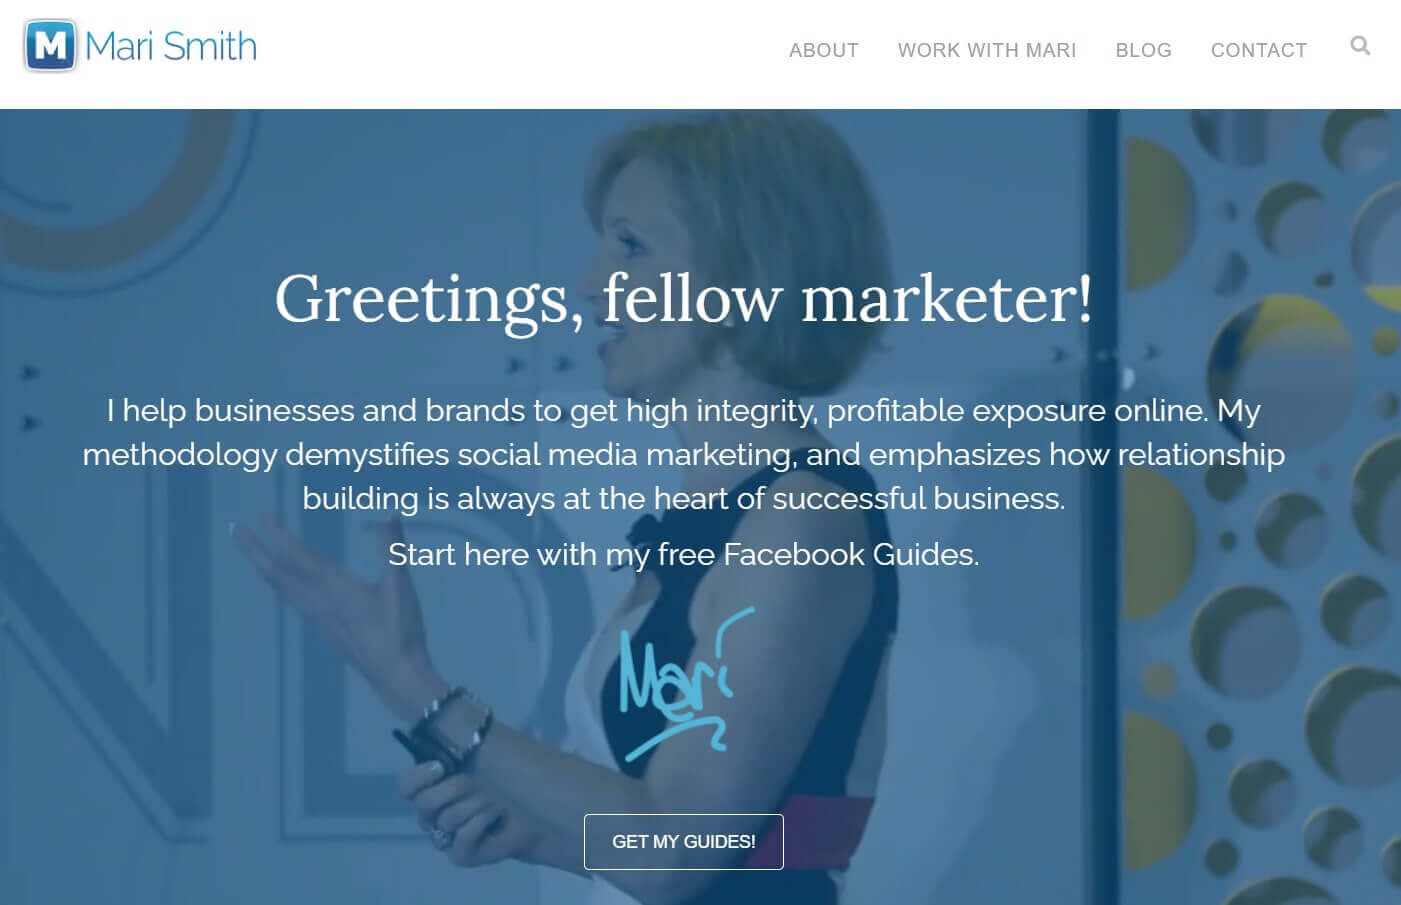 A screenshot of Mari Smith's website encouraging site visitors to get her free Facebook guides.